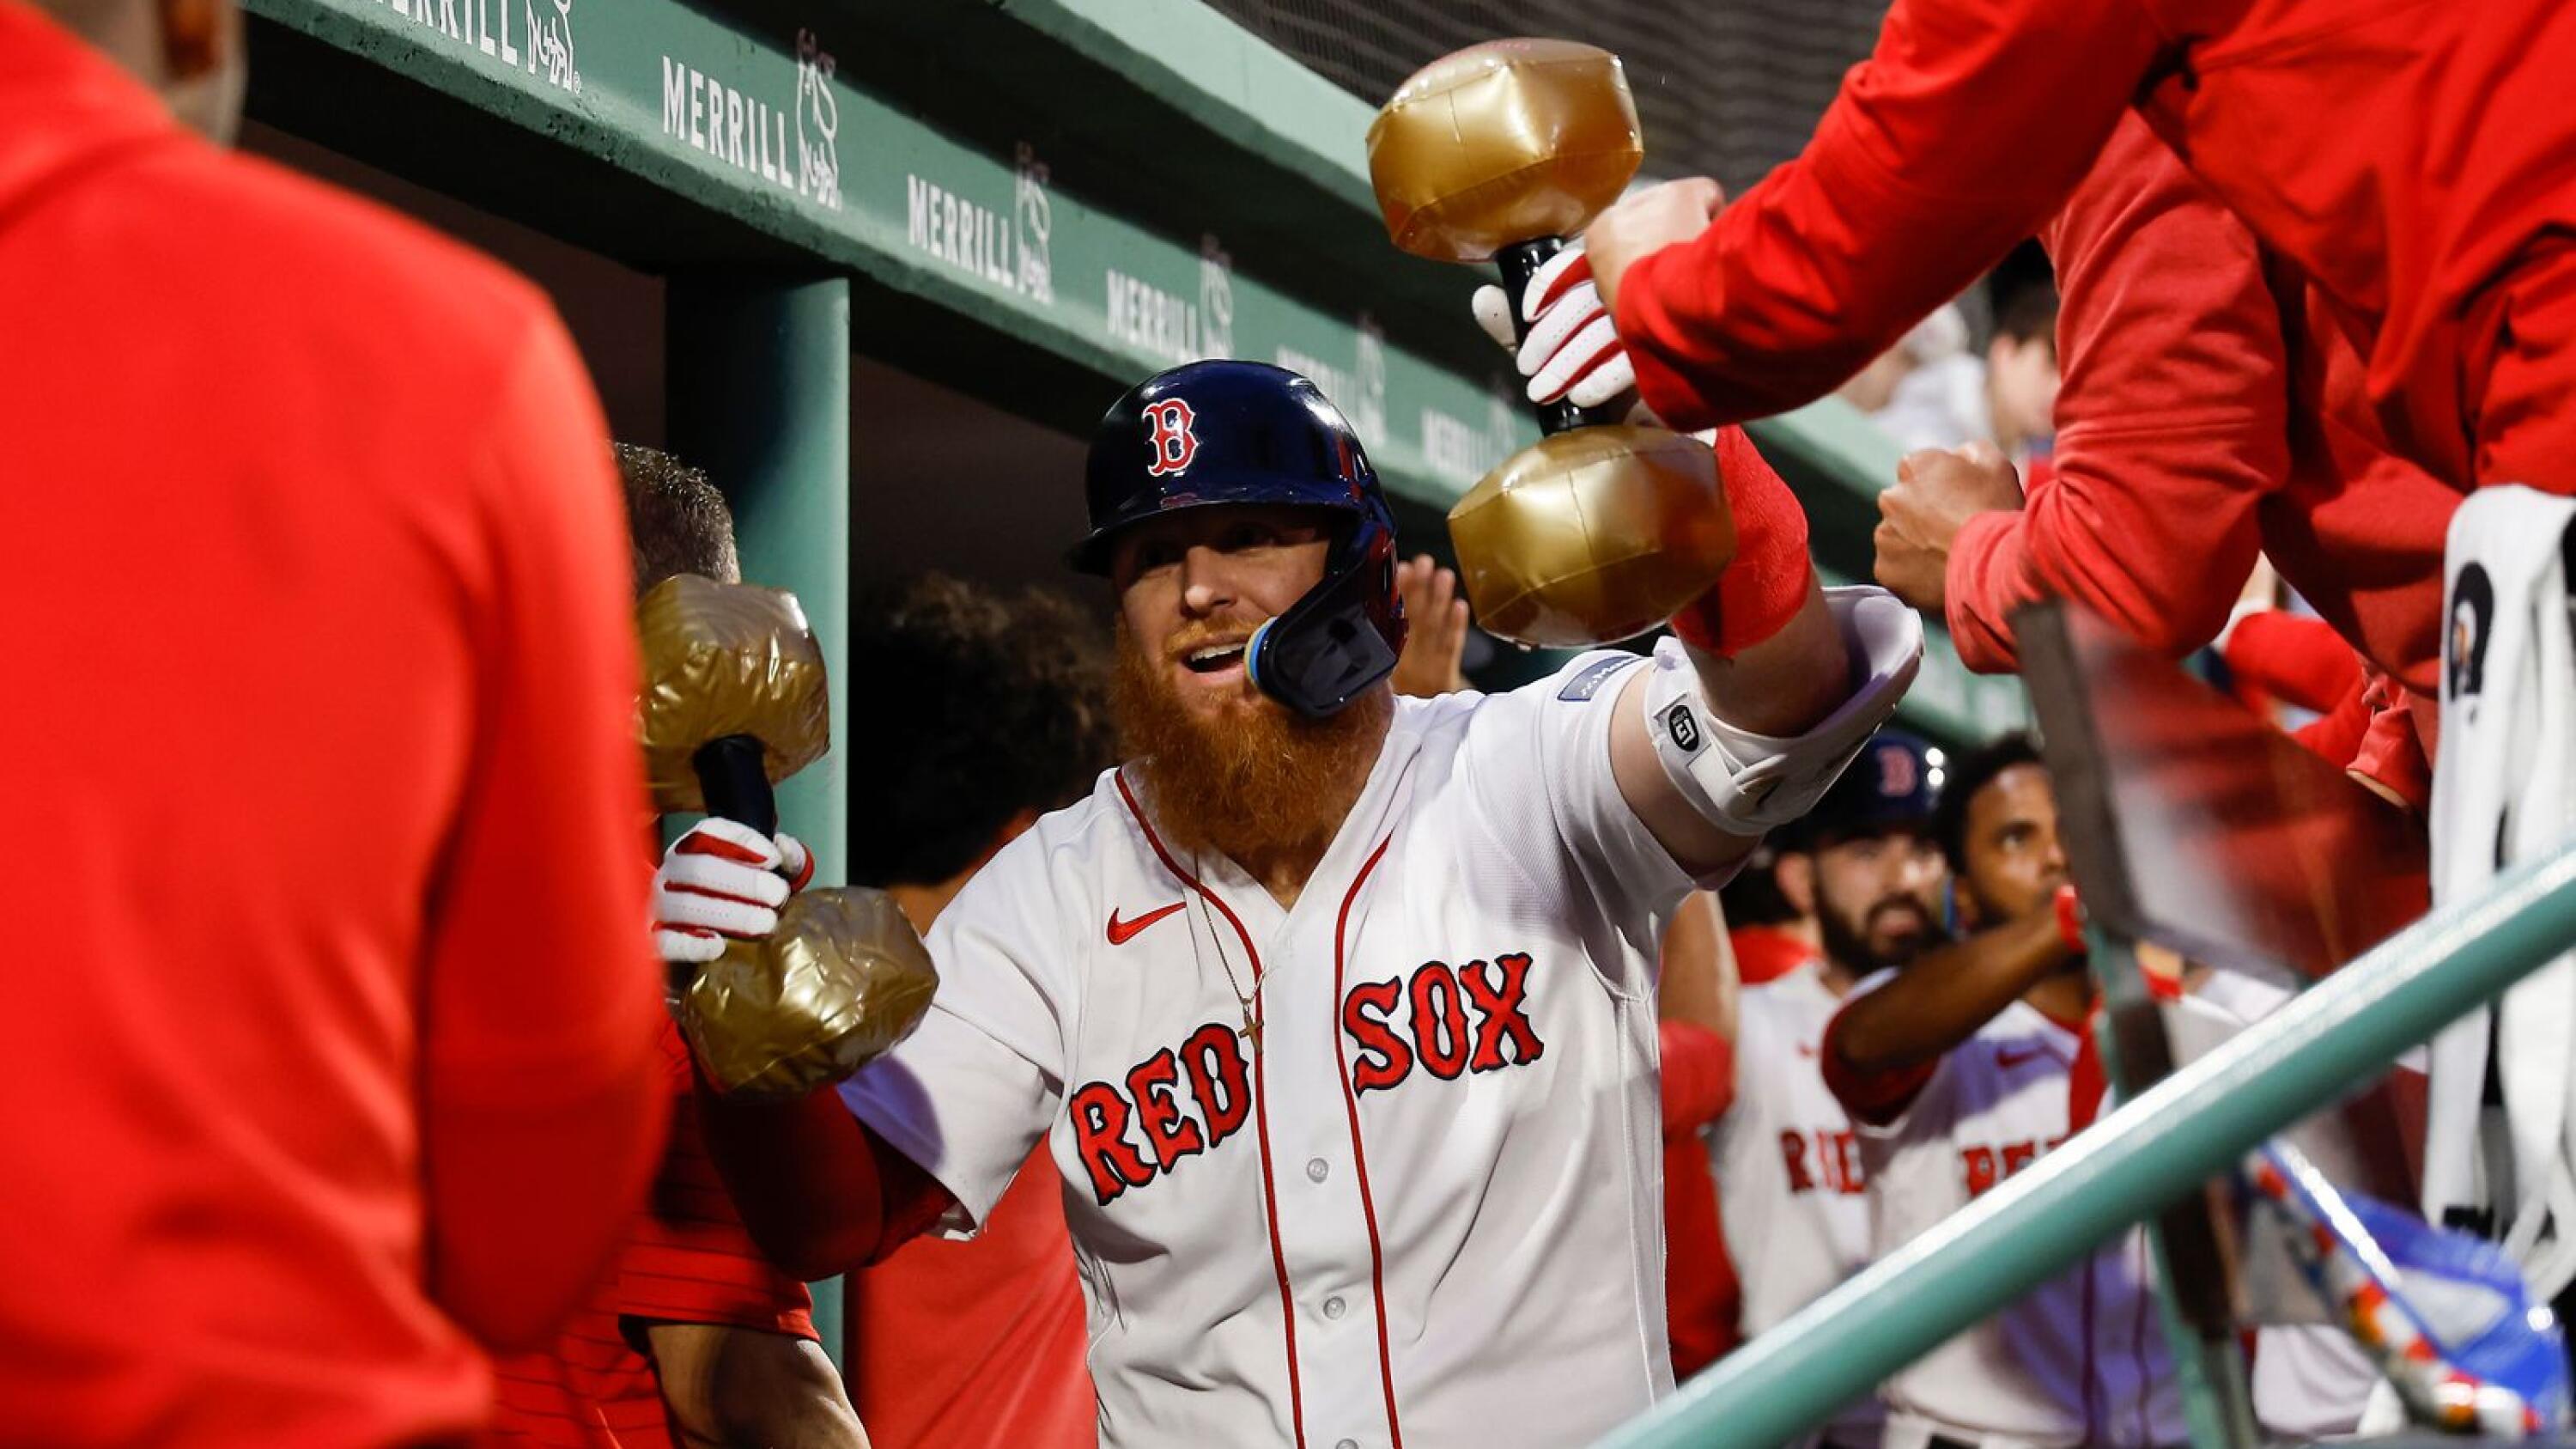 Turner homers twice, including grand slam, to help Red Sox rout